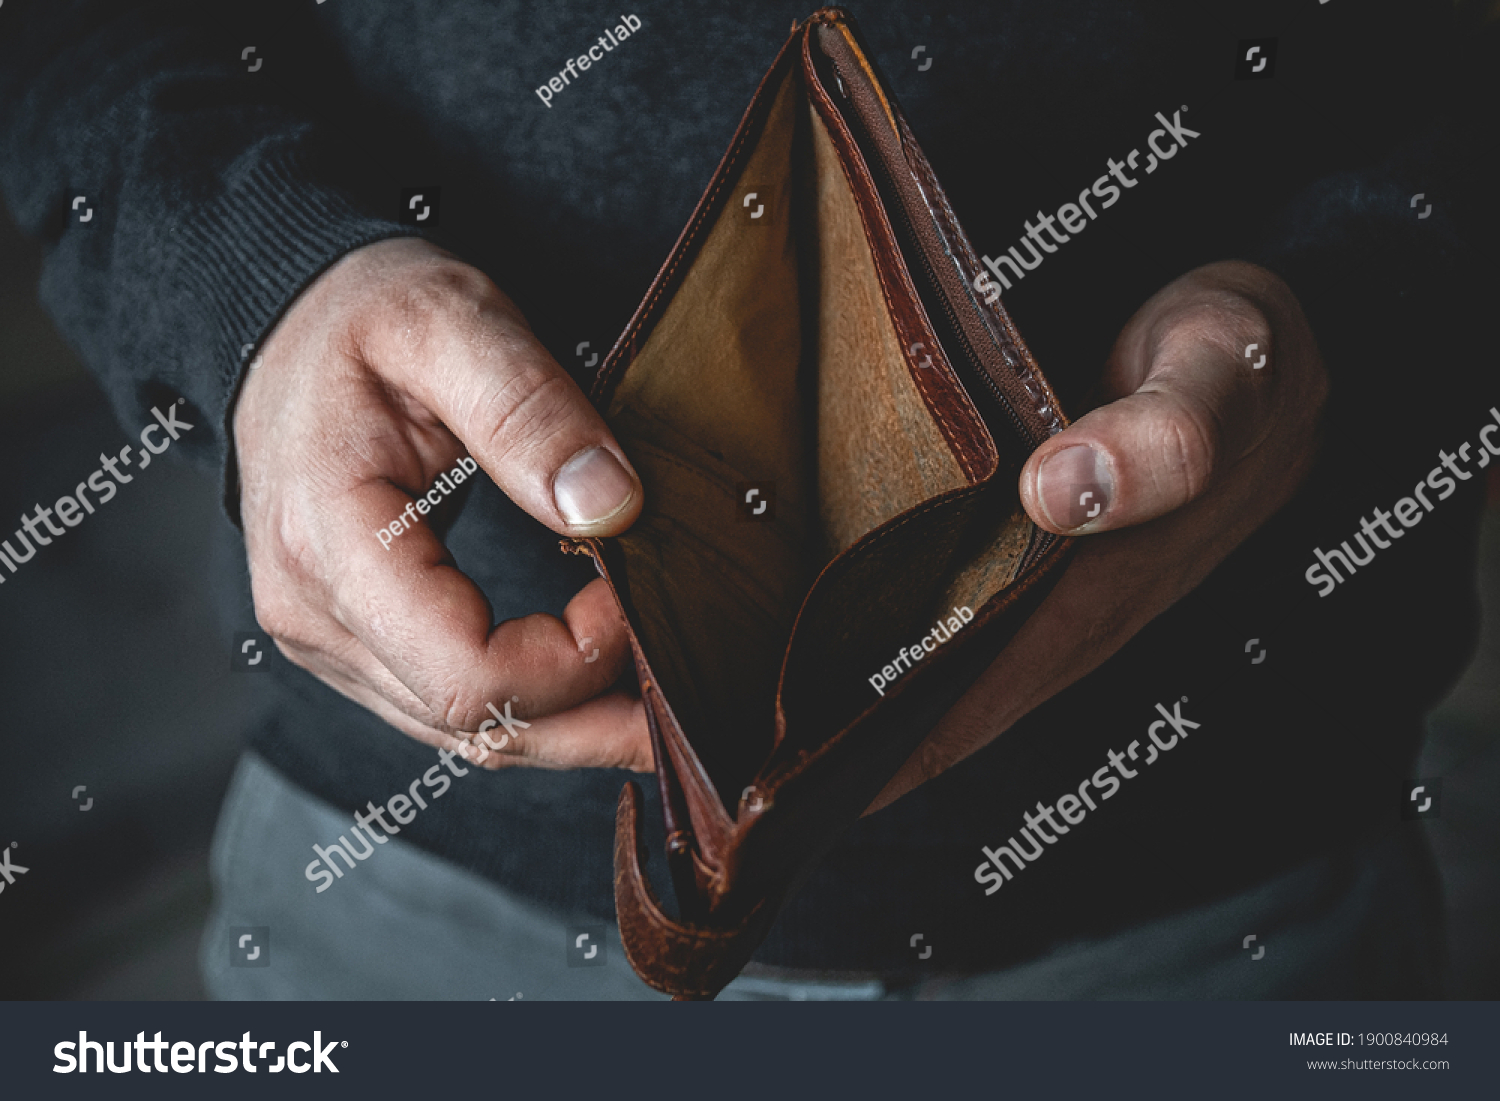 An Empty wallet in the hands of a young man #1900840984